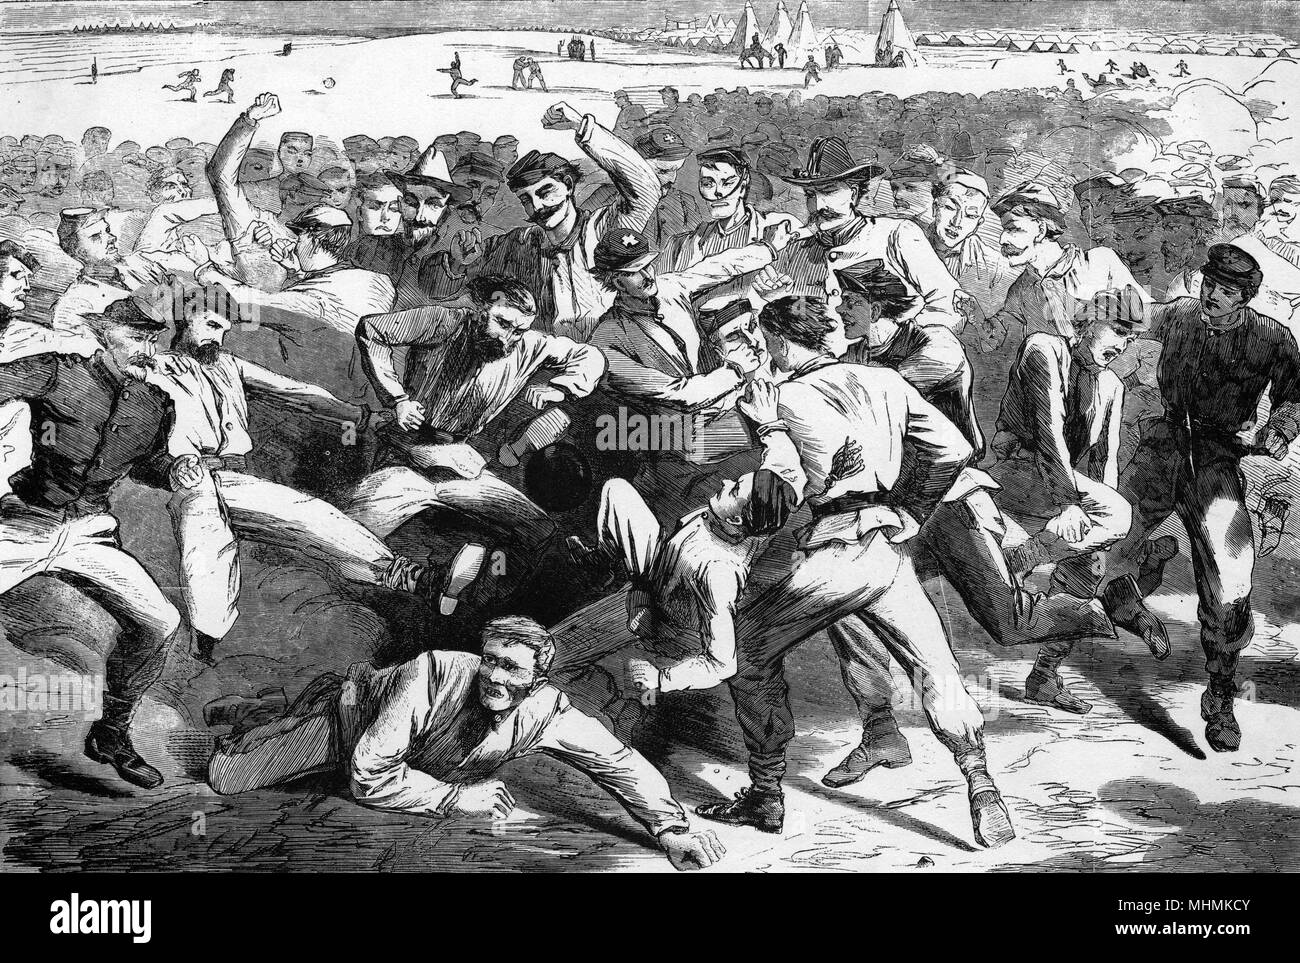 The rules of the game are overlooked by soldiers during a brutal game in camp, as fights break out everywhere and the ball is ignored.      Date: 1865 Stock Photo